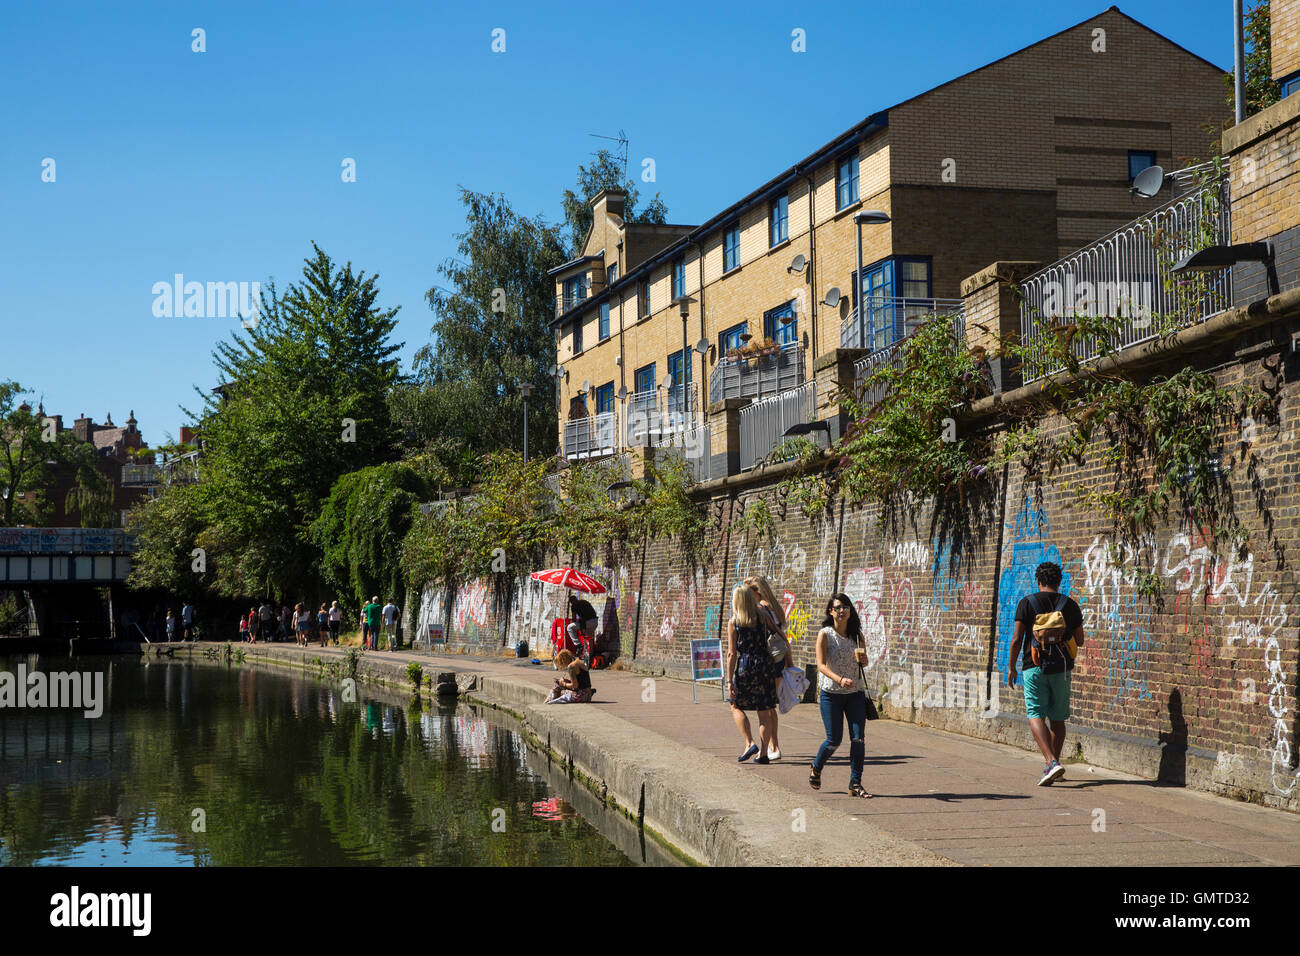 London, England. 26th August 2016. Regent's Canal, , London, UK. Stock Photo